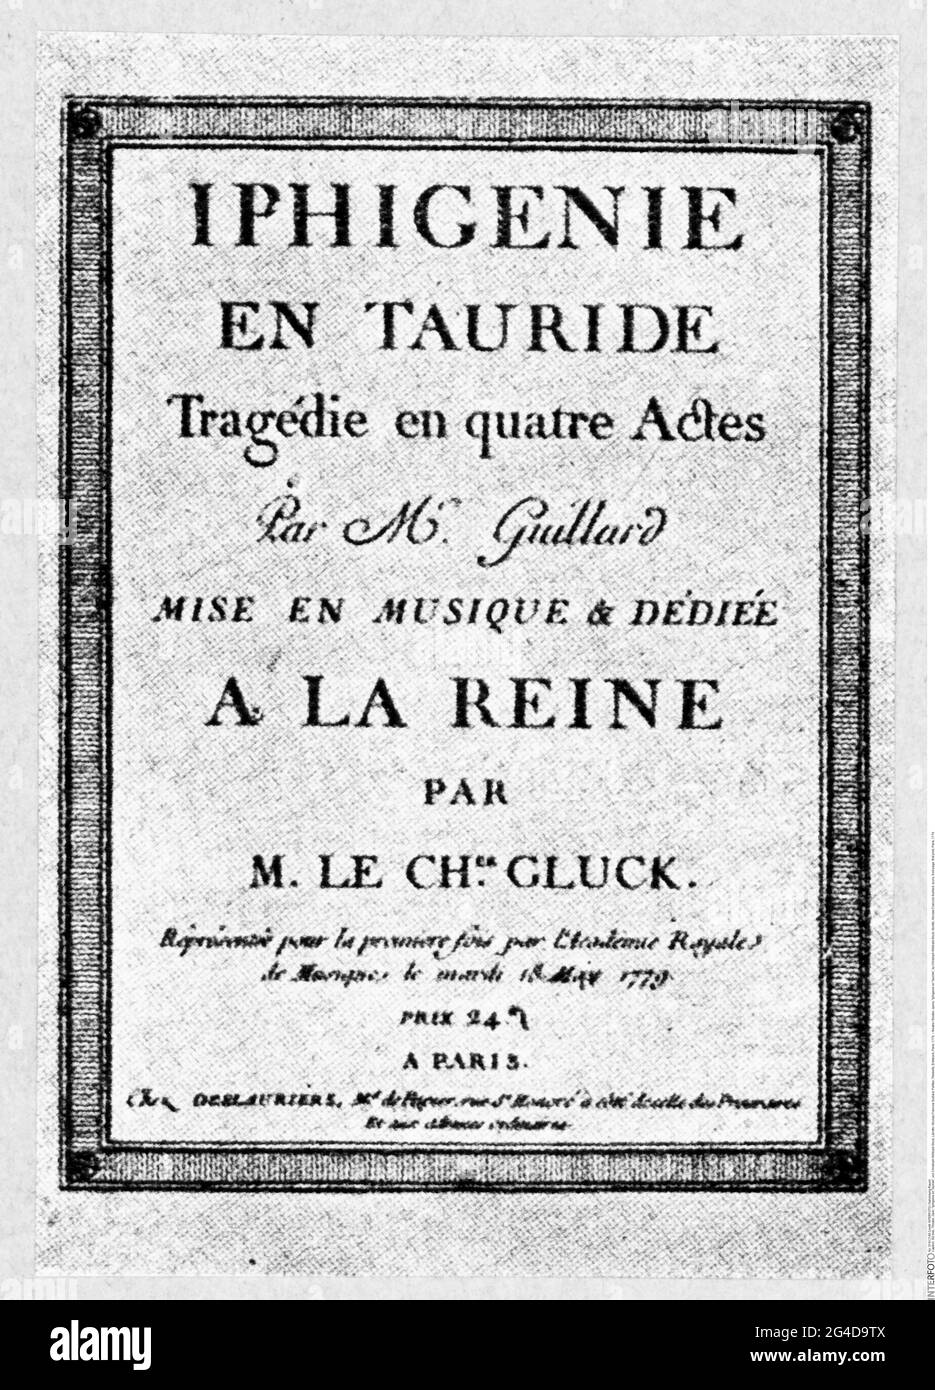 theatre / theater, opera, 'Iphigenie en Tauride', by Christoph Willibald Gluck, ARTIST'S COPYRIGHT HAS NOT TO BE CLEARED Stock Photo